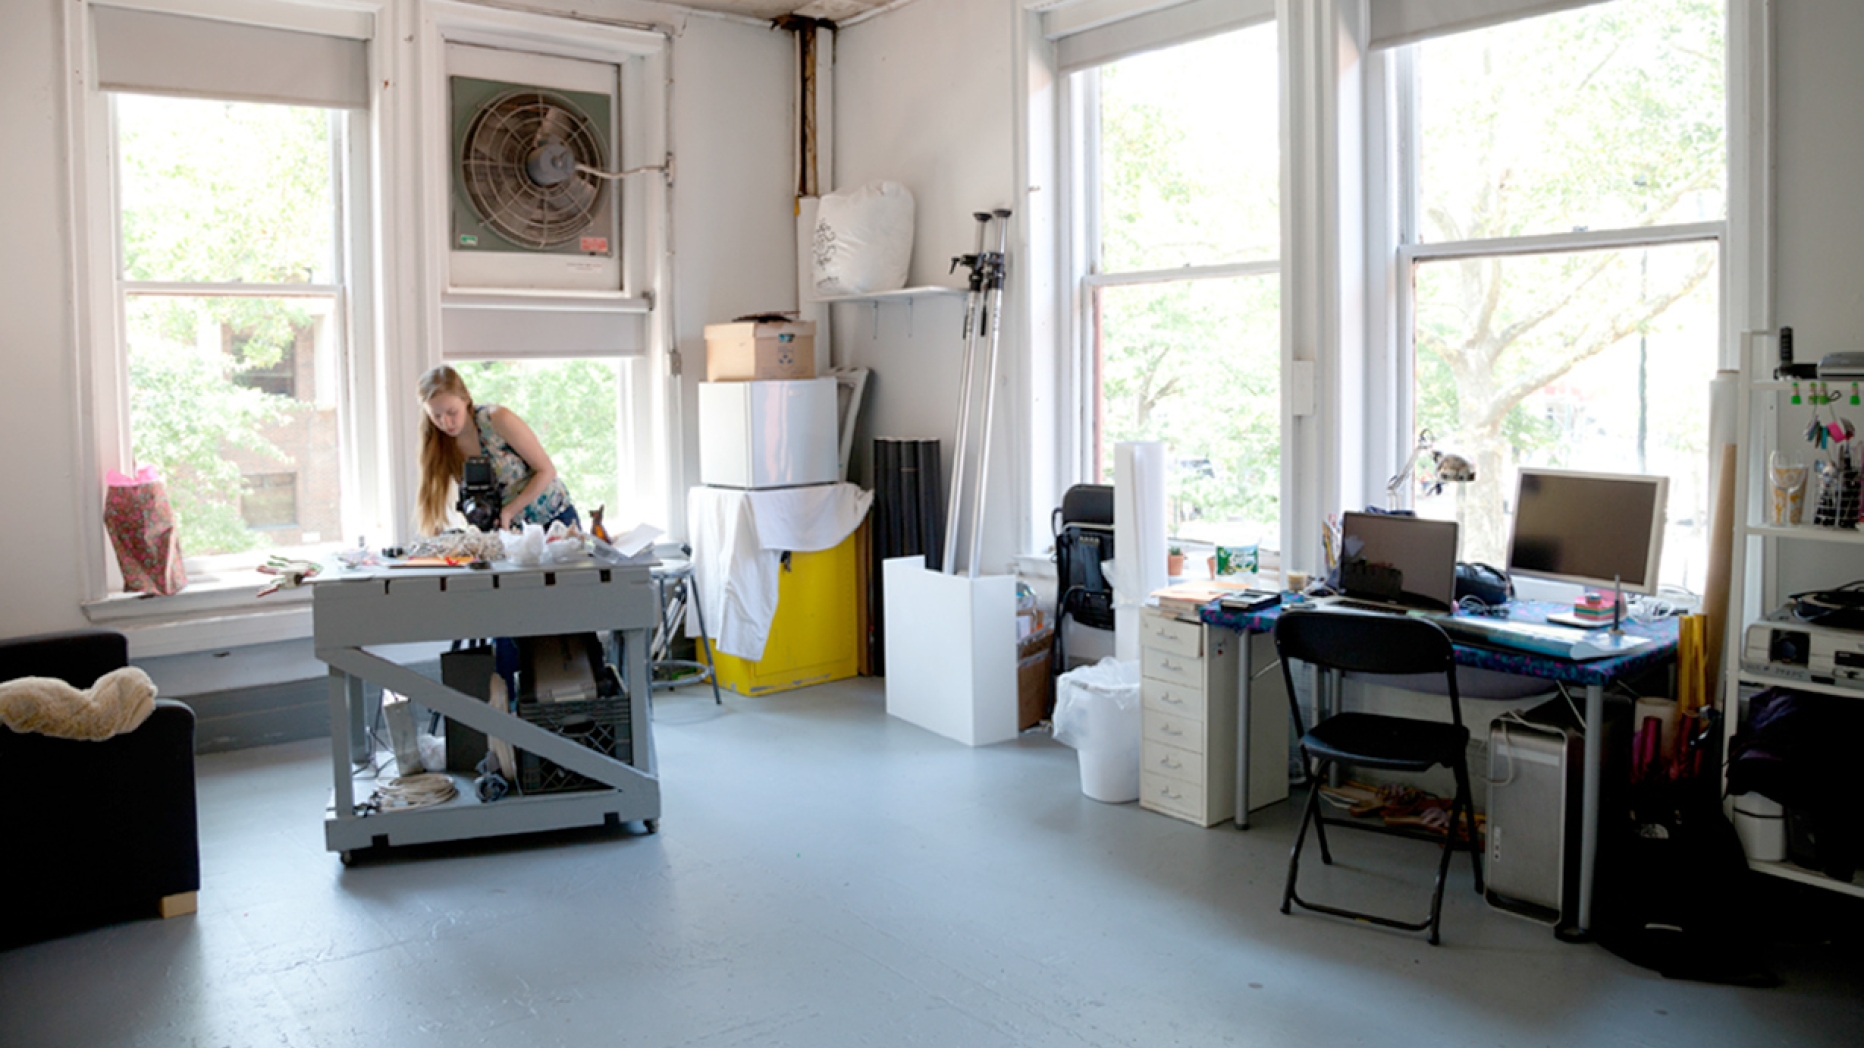 In a large studio space with large windows a student works at a work table in the middle of the room